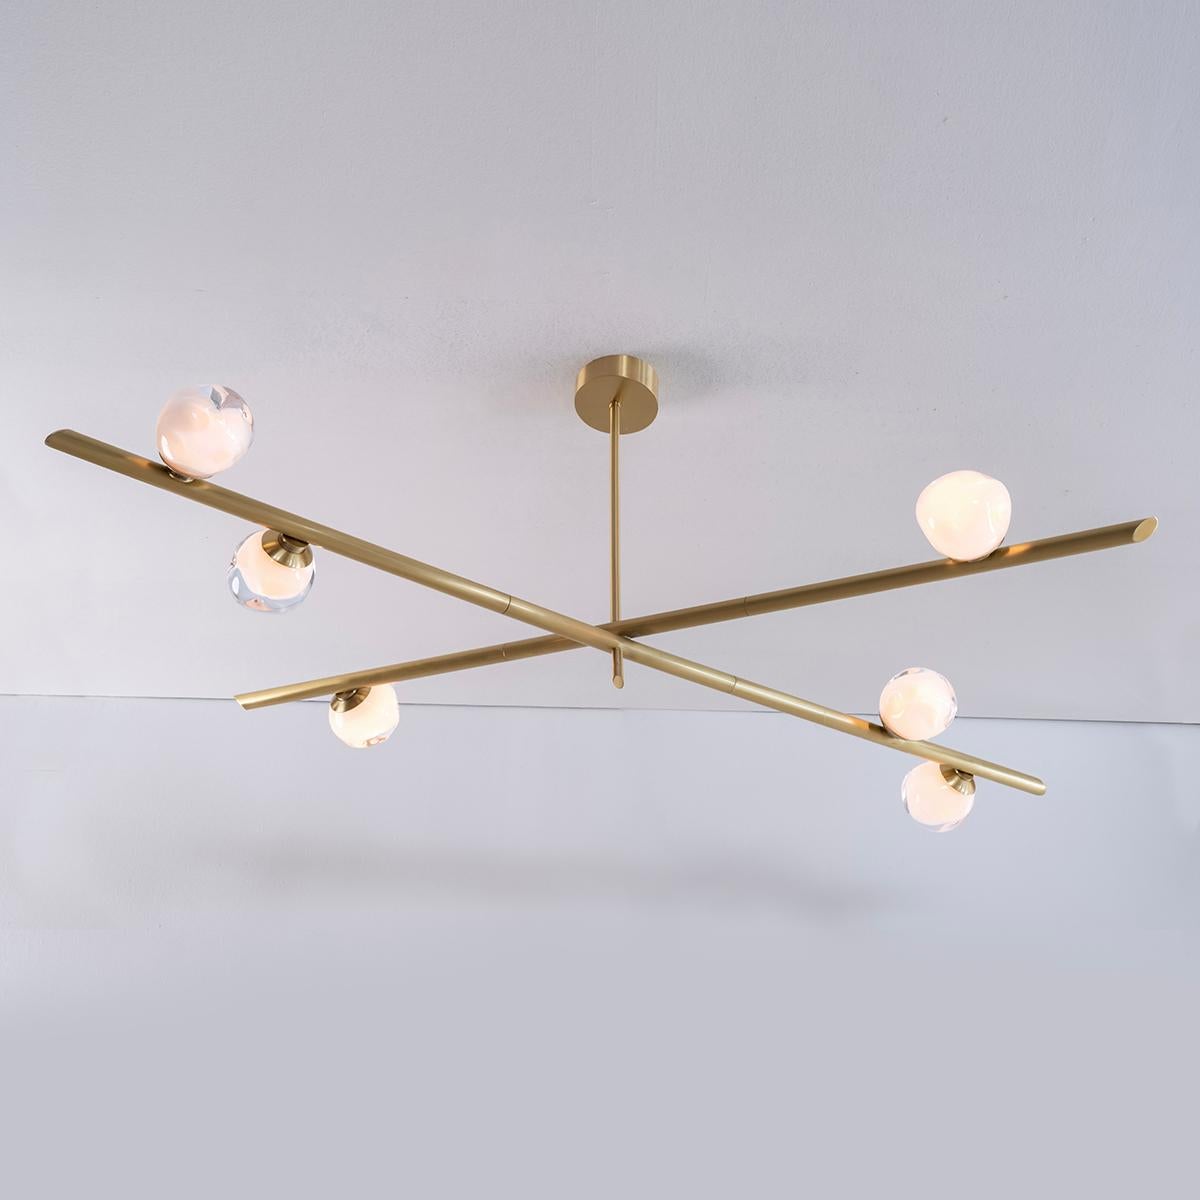 The Antares ceiling light harmoniously balances the linear details of its intersecting arms with the organic form of its handblown glass shades. 

Customization Options:

Each piece is hand crafted in Italy and is available in any of our 10 finishes